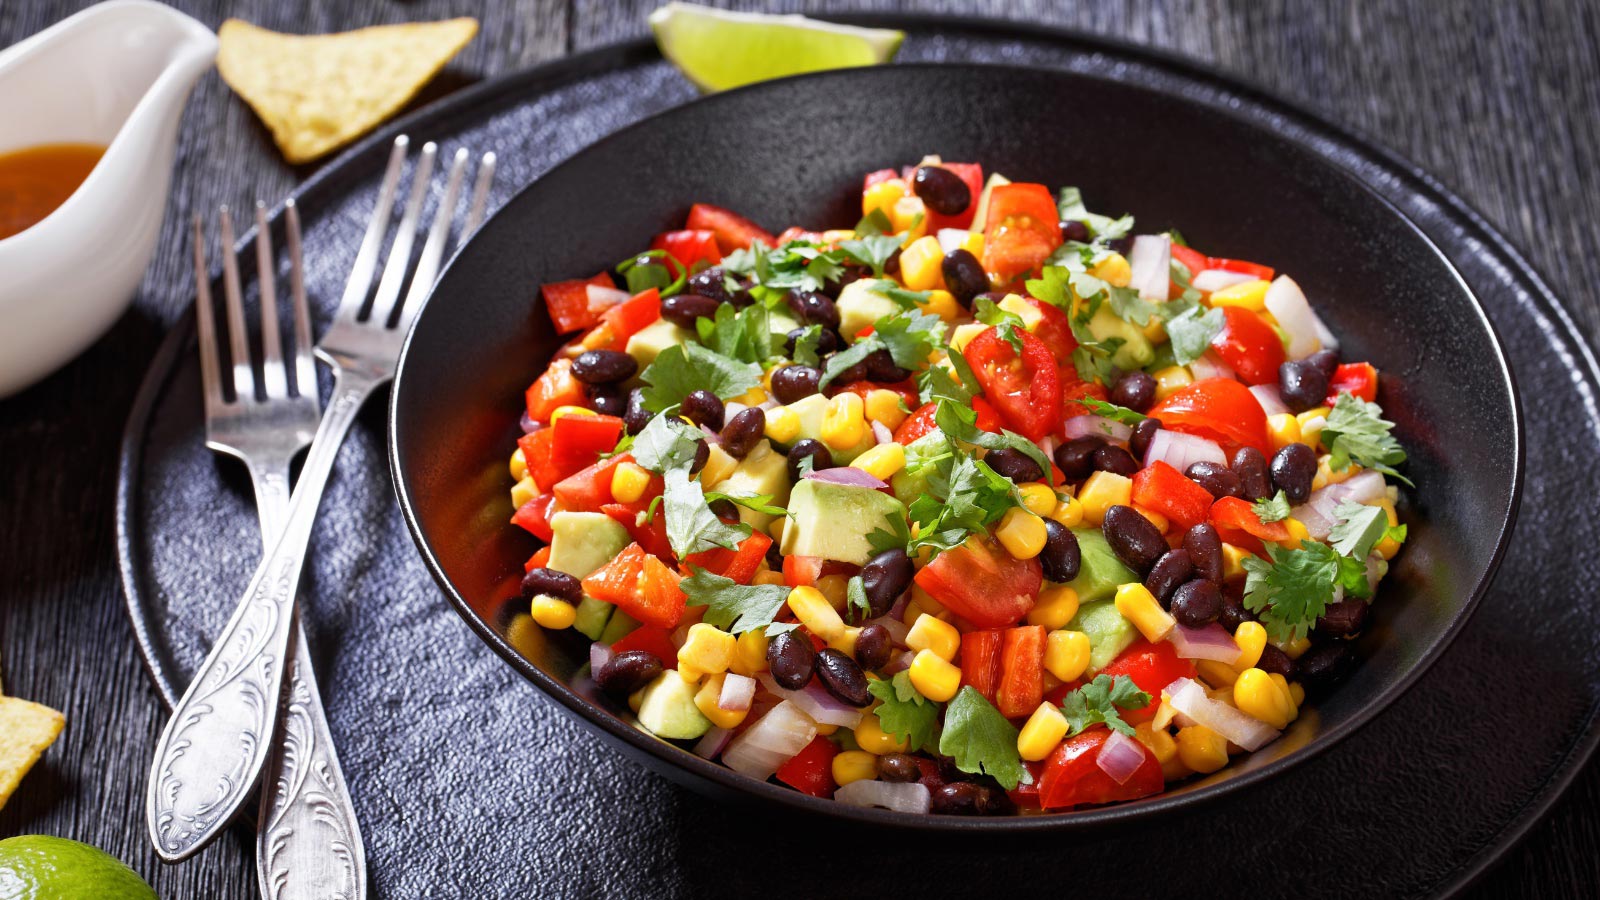 16 Corn Recipes For Delicious Summer Meals